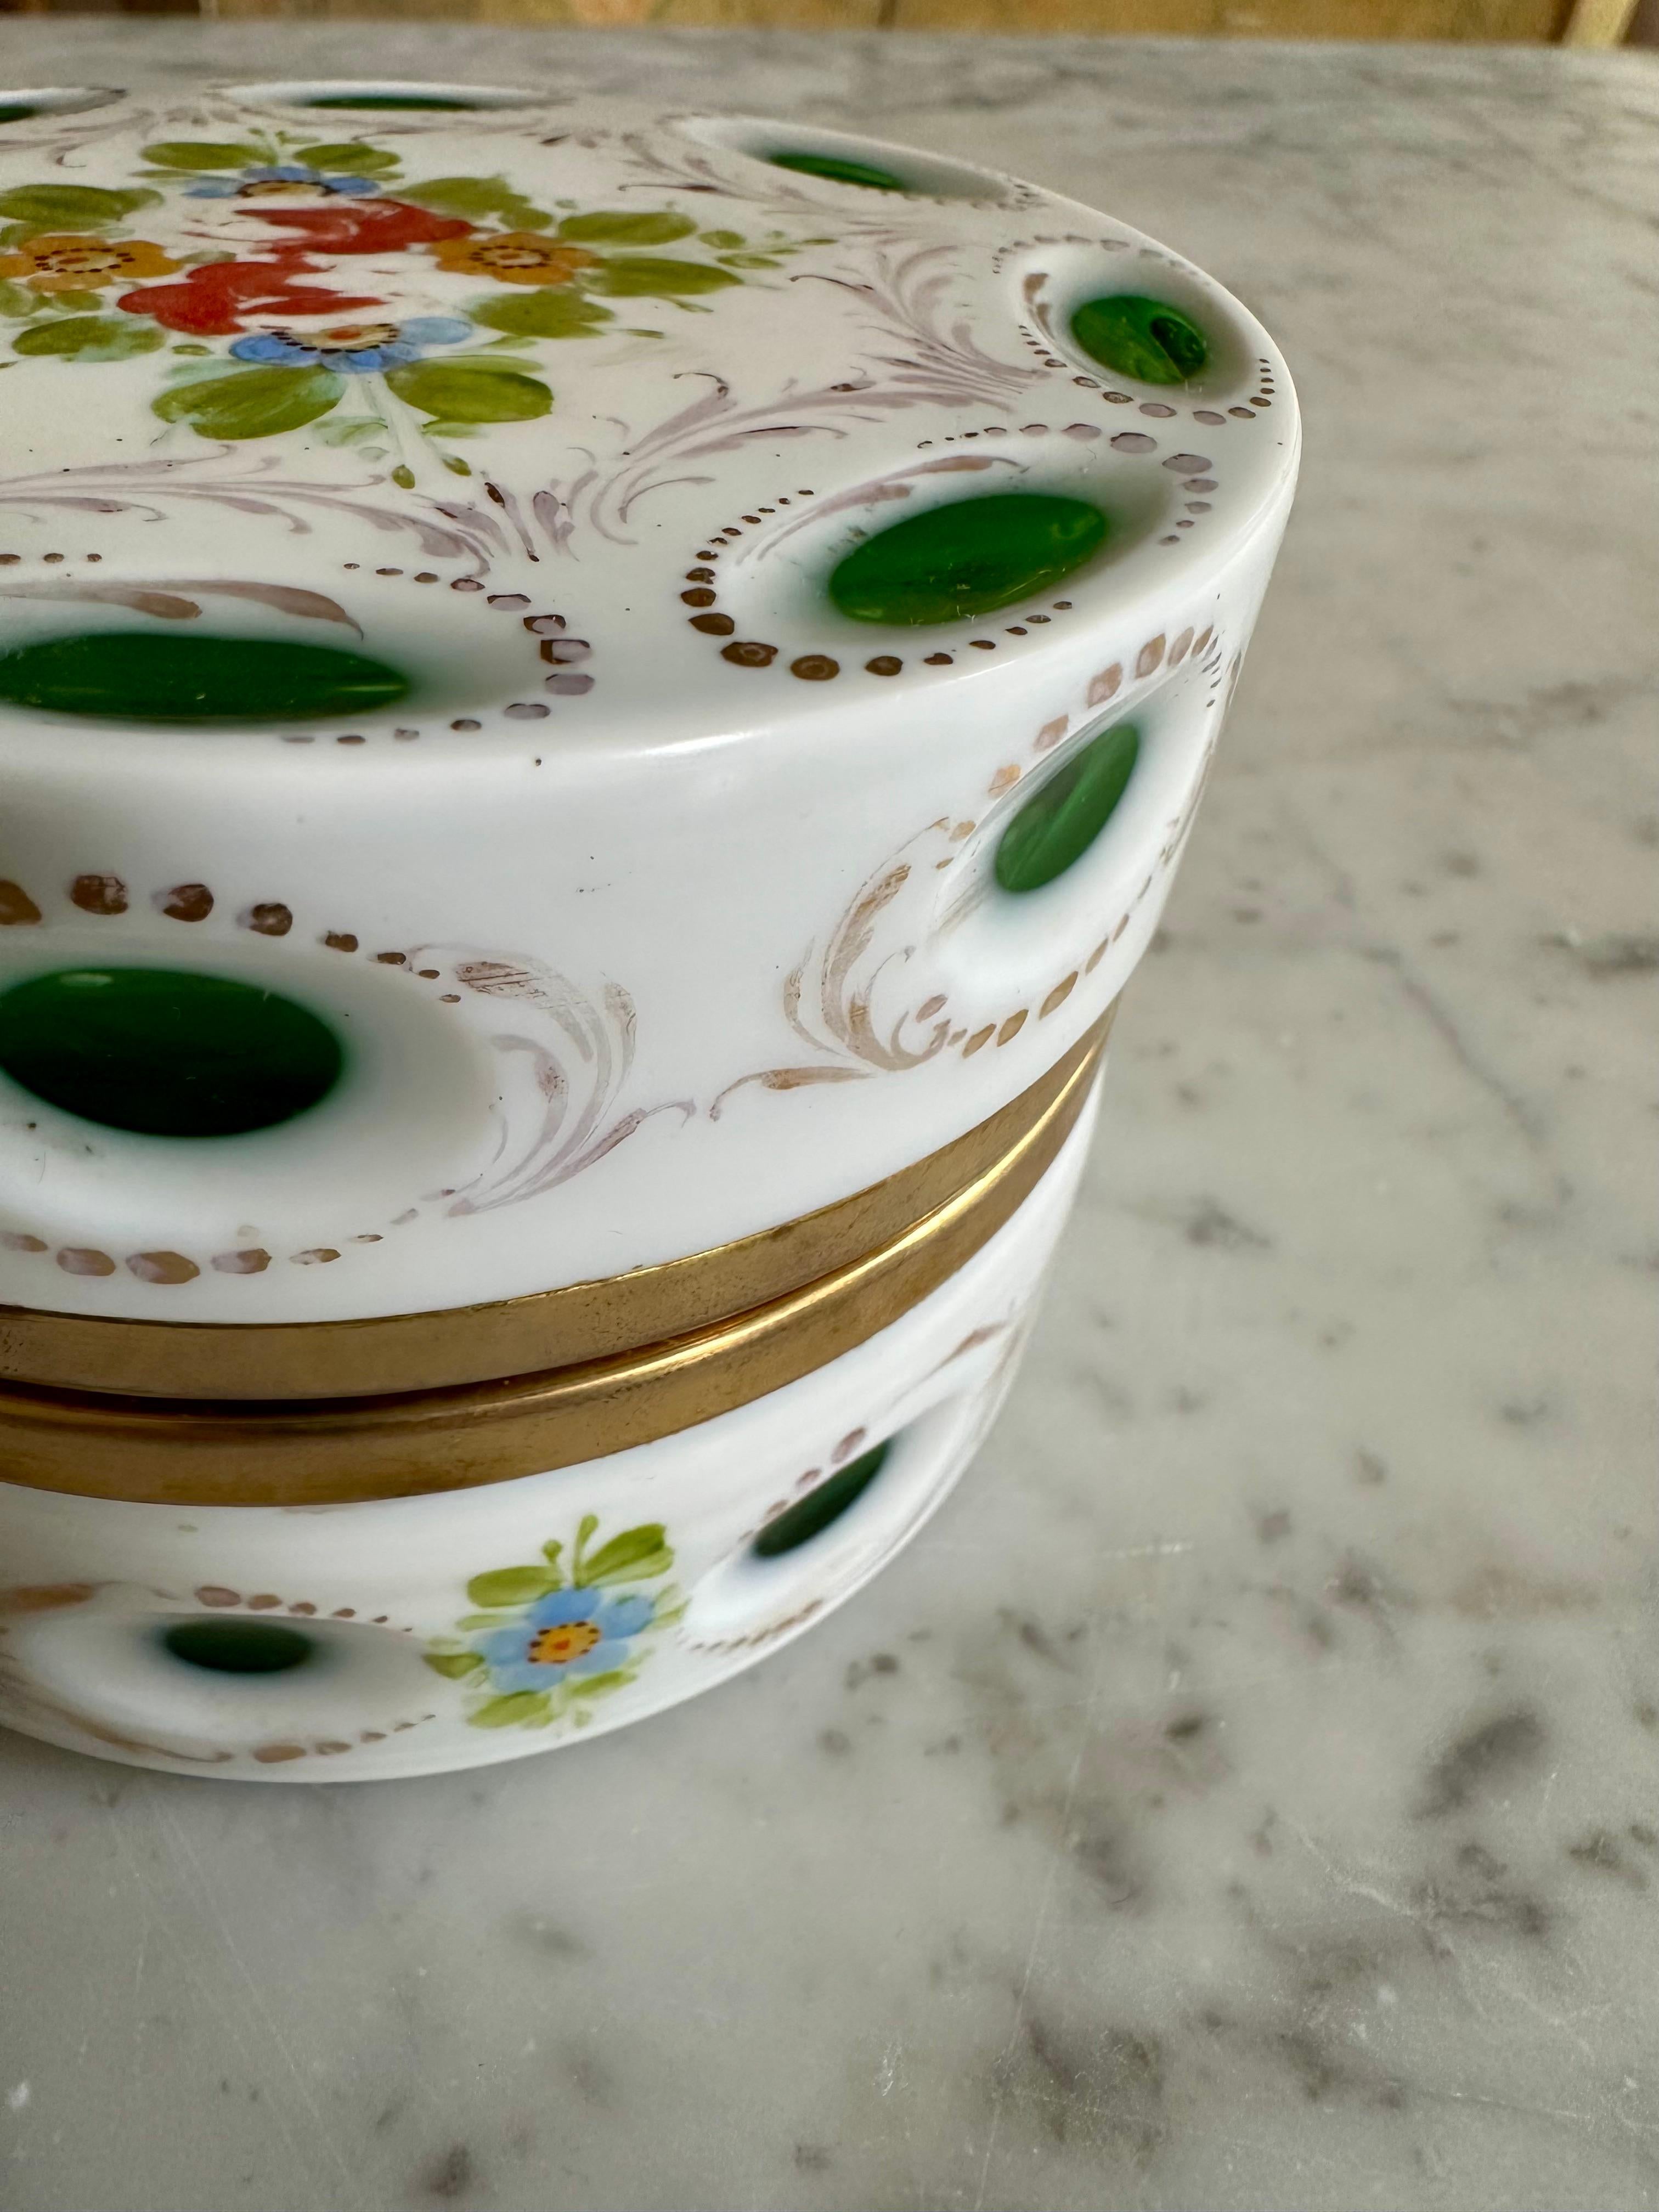 1890s Opaline Glass Lidded Box with Floral Ornament, white an green In Good Condition For Sale In Hamburg, DE